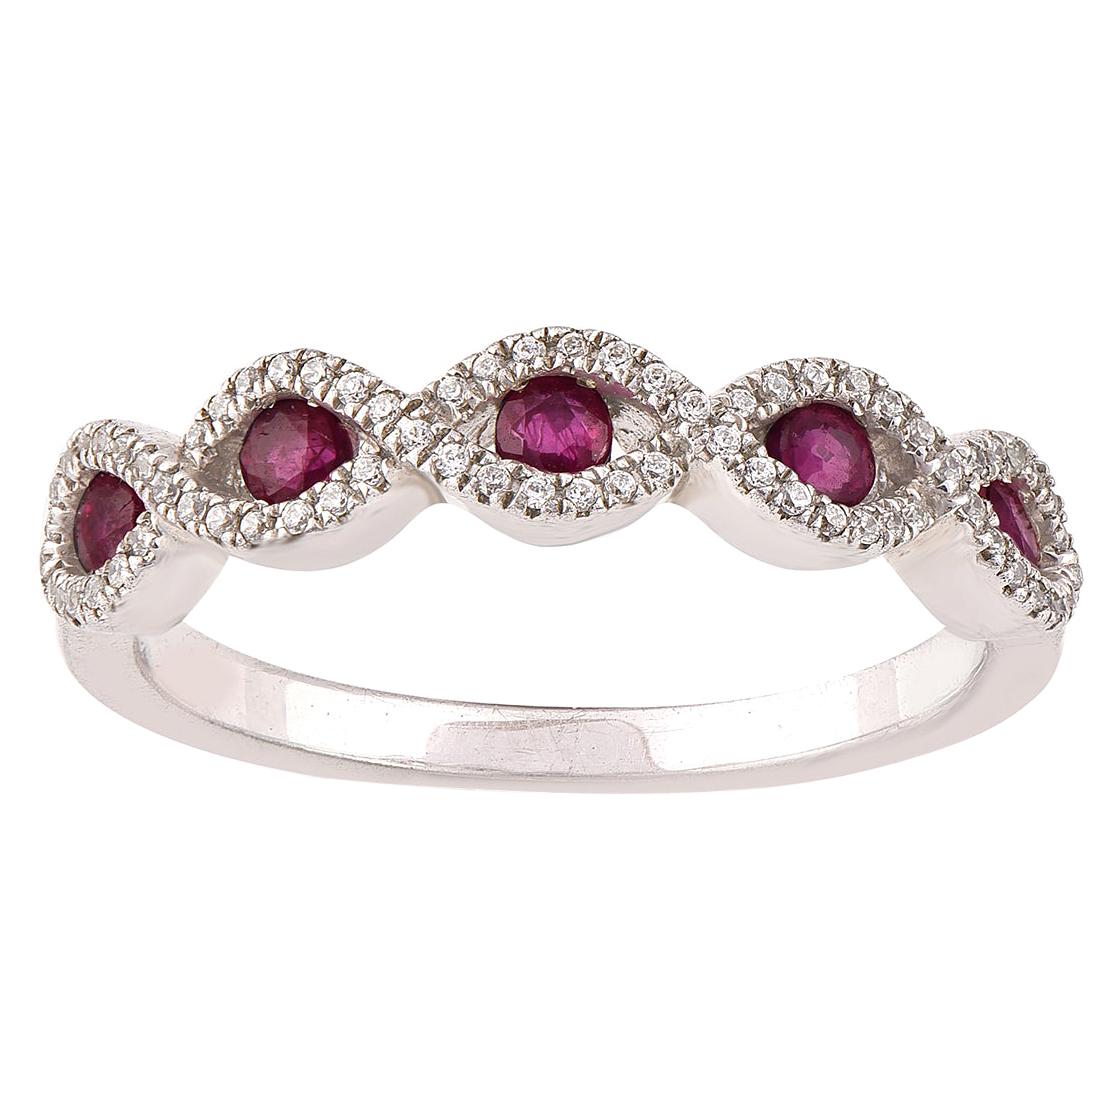 TJD 0.17 Carat Diamond and Ruby 14 Karat White Gold Twisted Infinity Band Ring For Sale